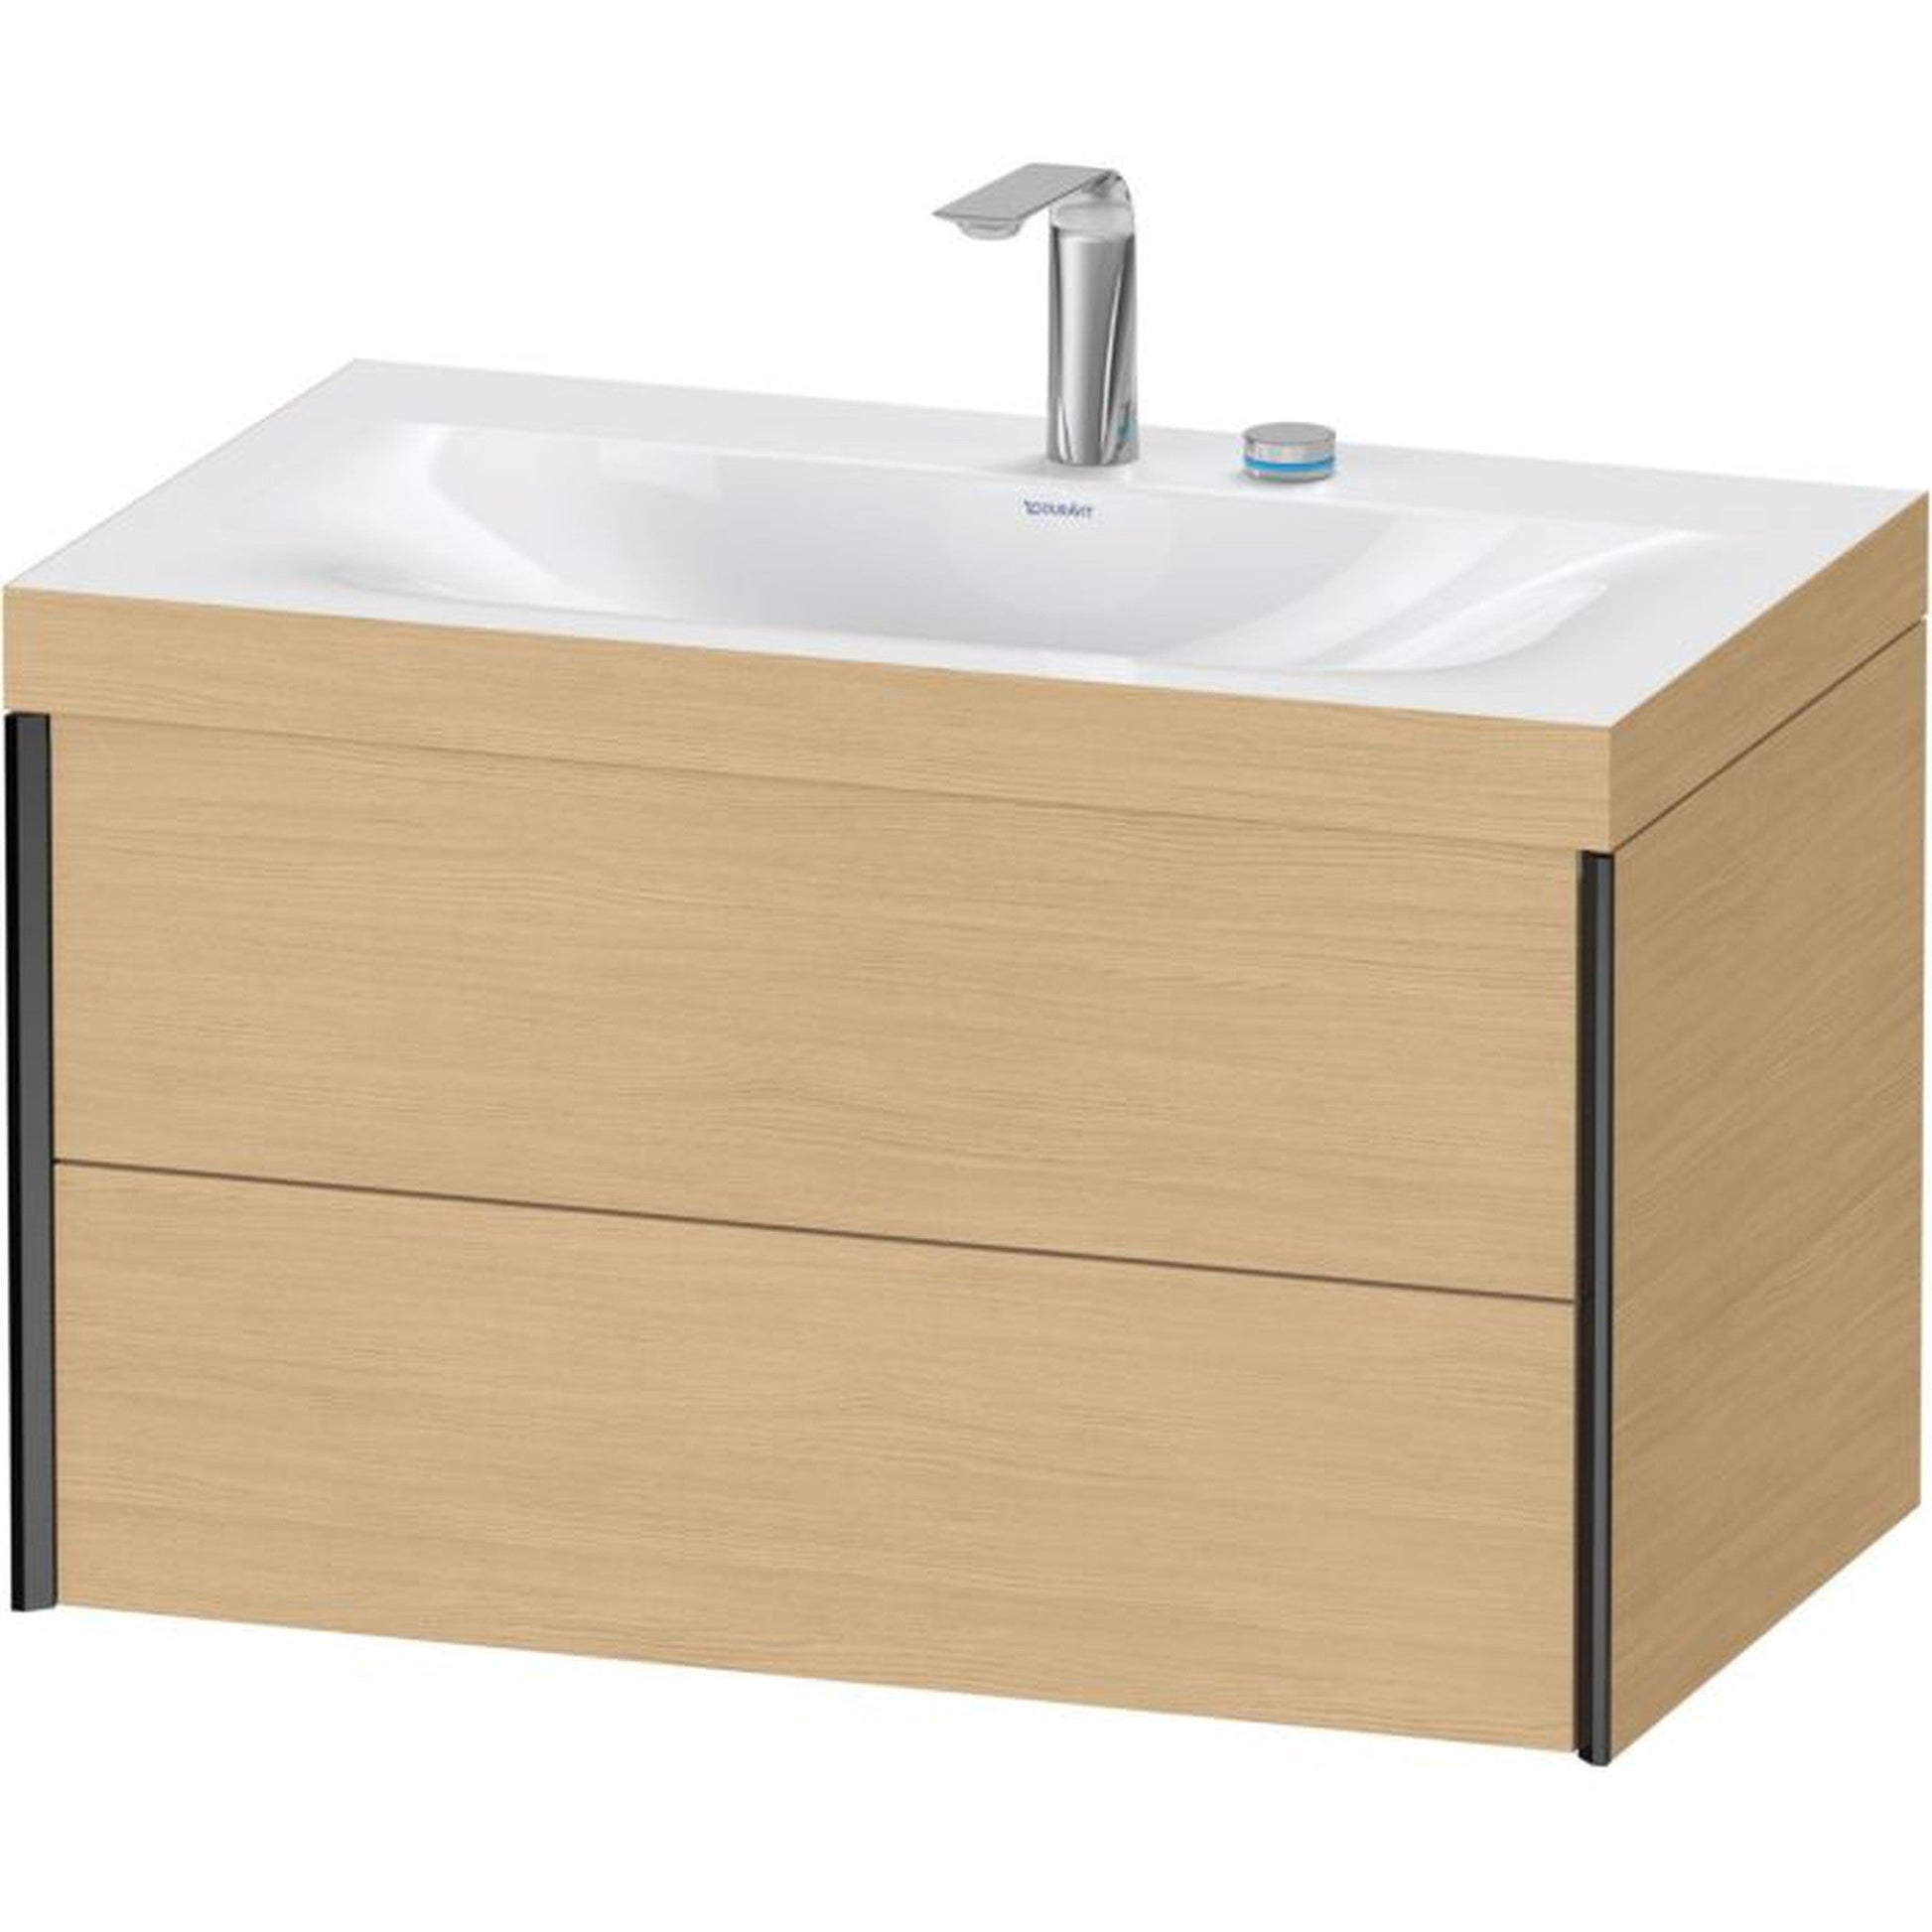 Duravit Xviu 31" x 20" x 19" Two Drawer C-Bonded Wall-Mount Vanity Kit With Two Tap Holes, Natural Oak (XV4615EB230C)